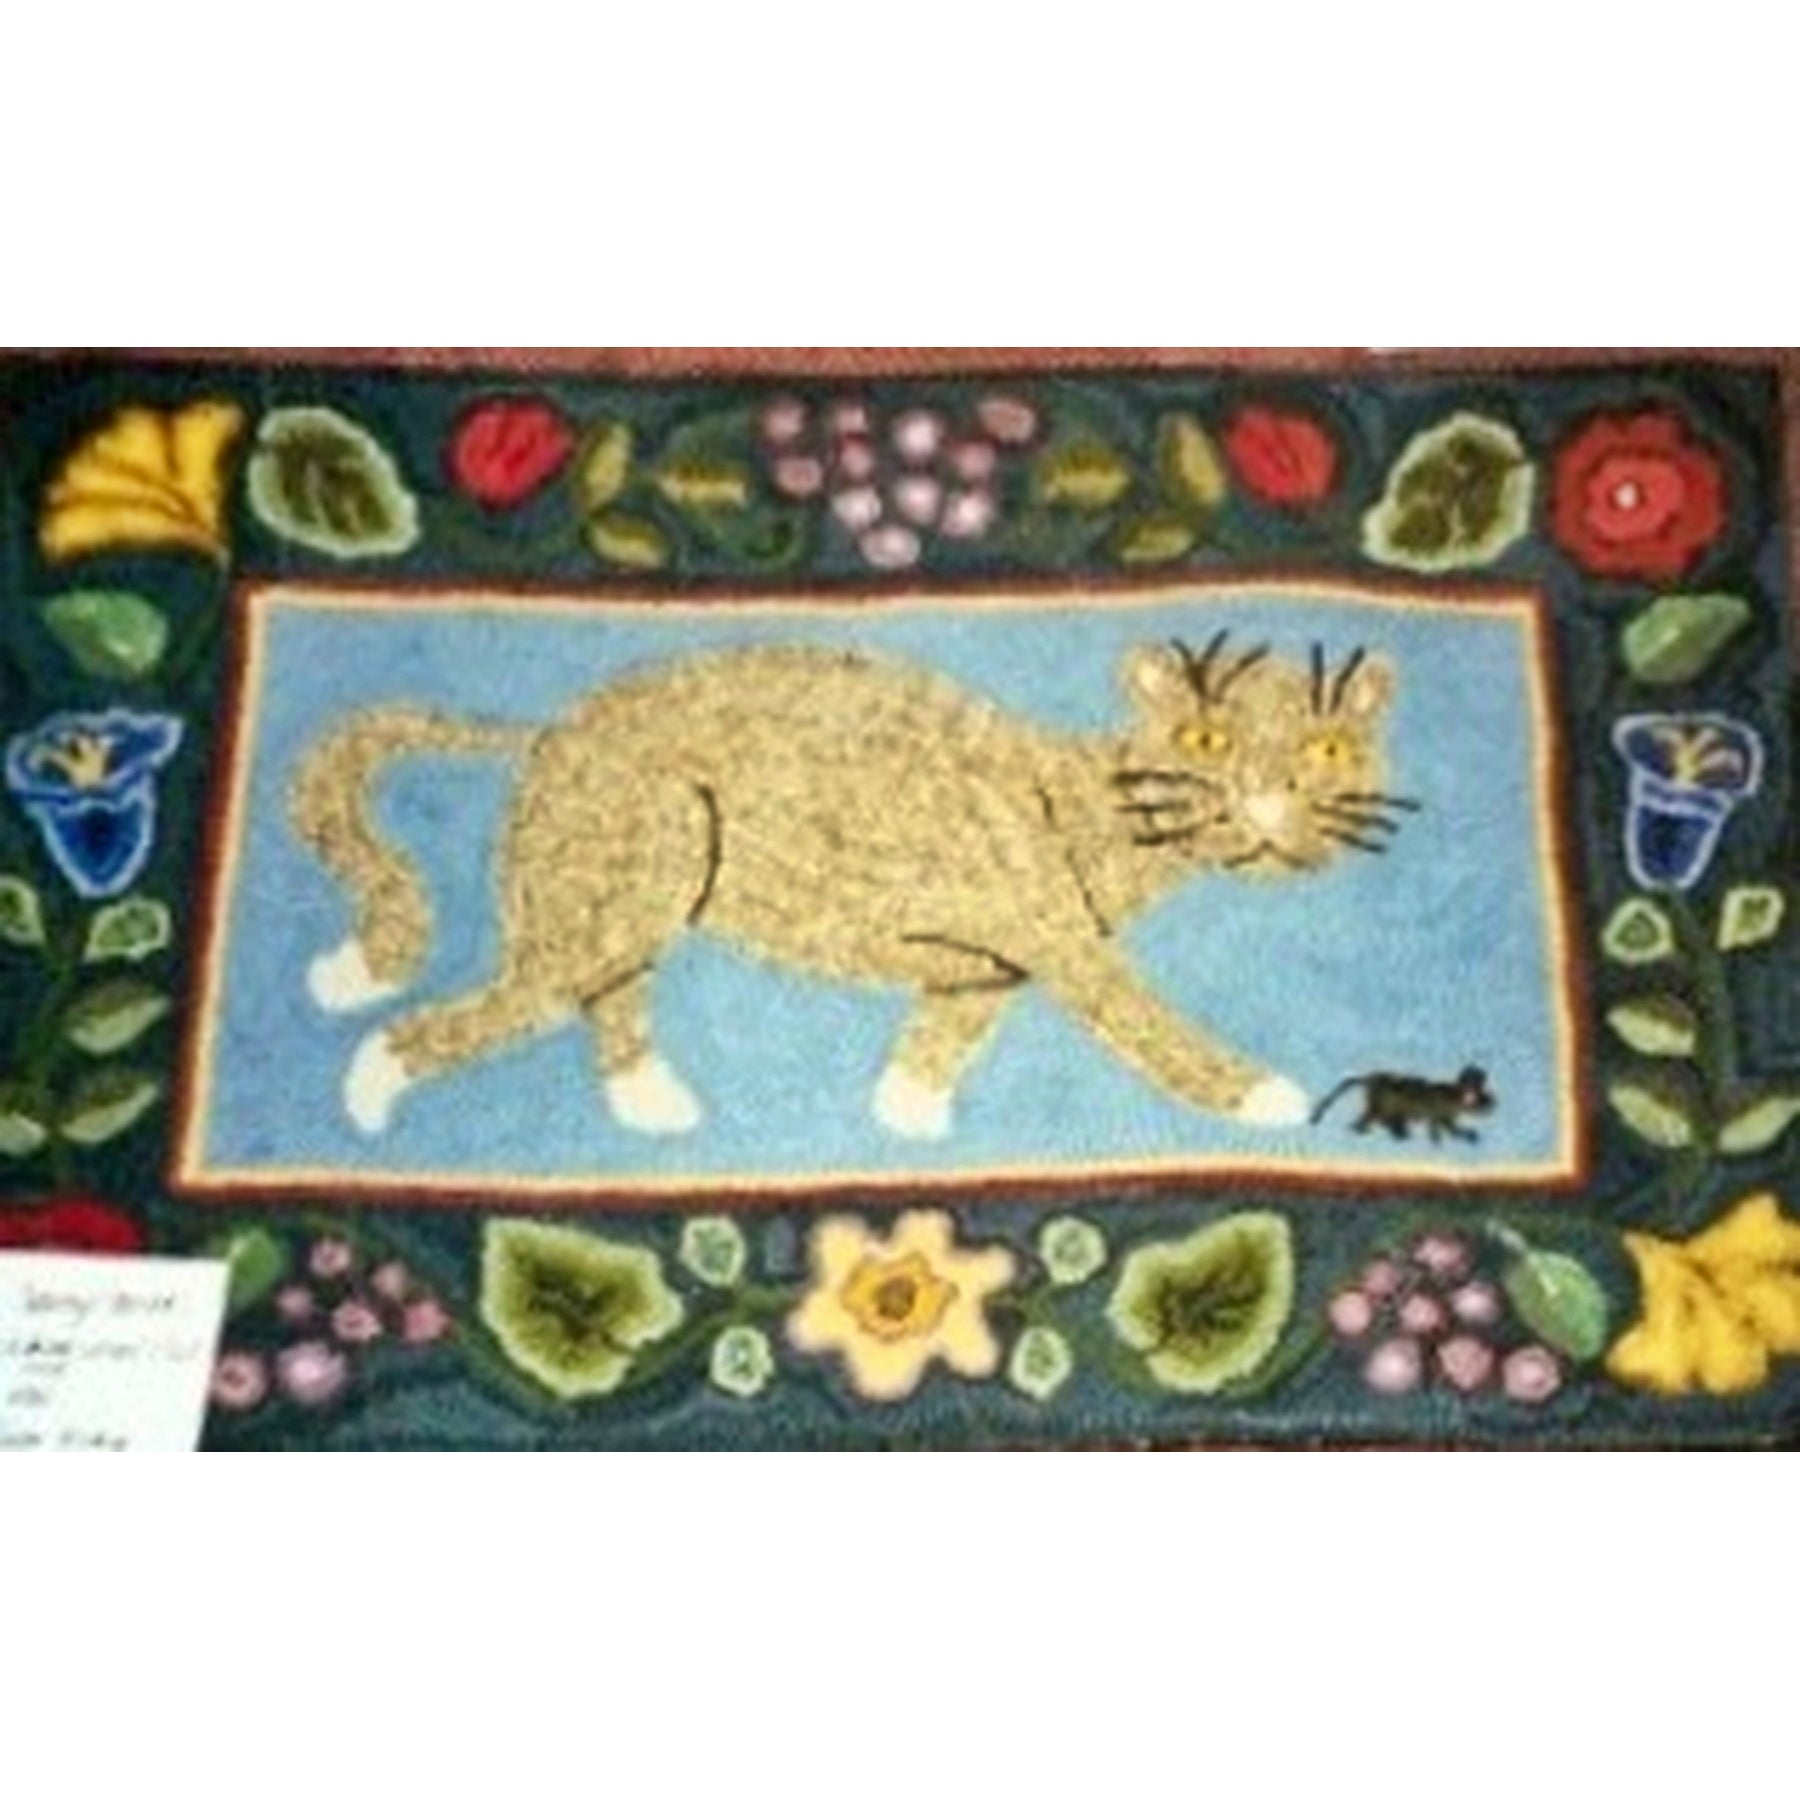 Whimsical Cat, rug hooked by Darcy Cardas